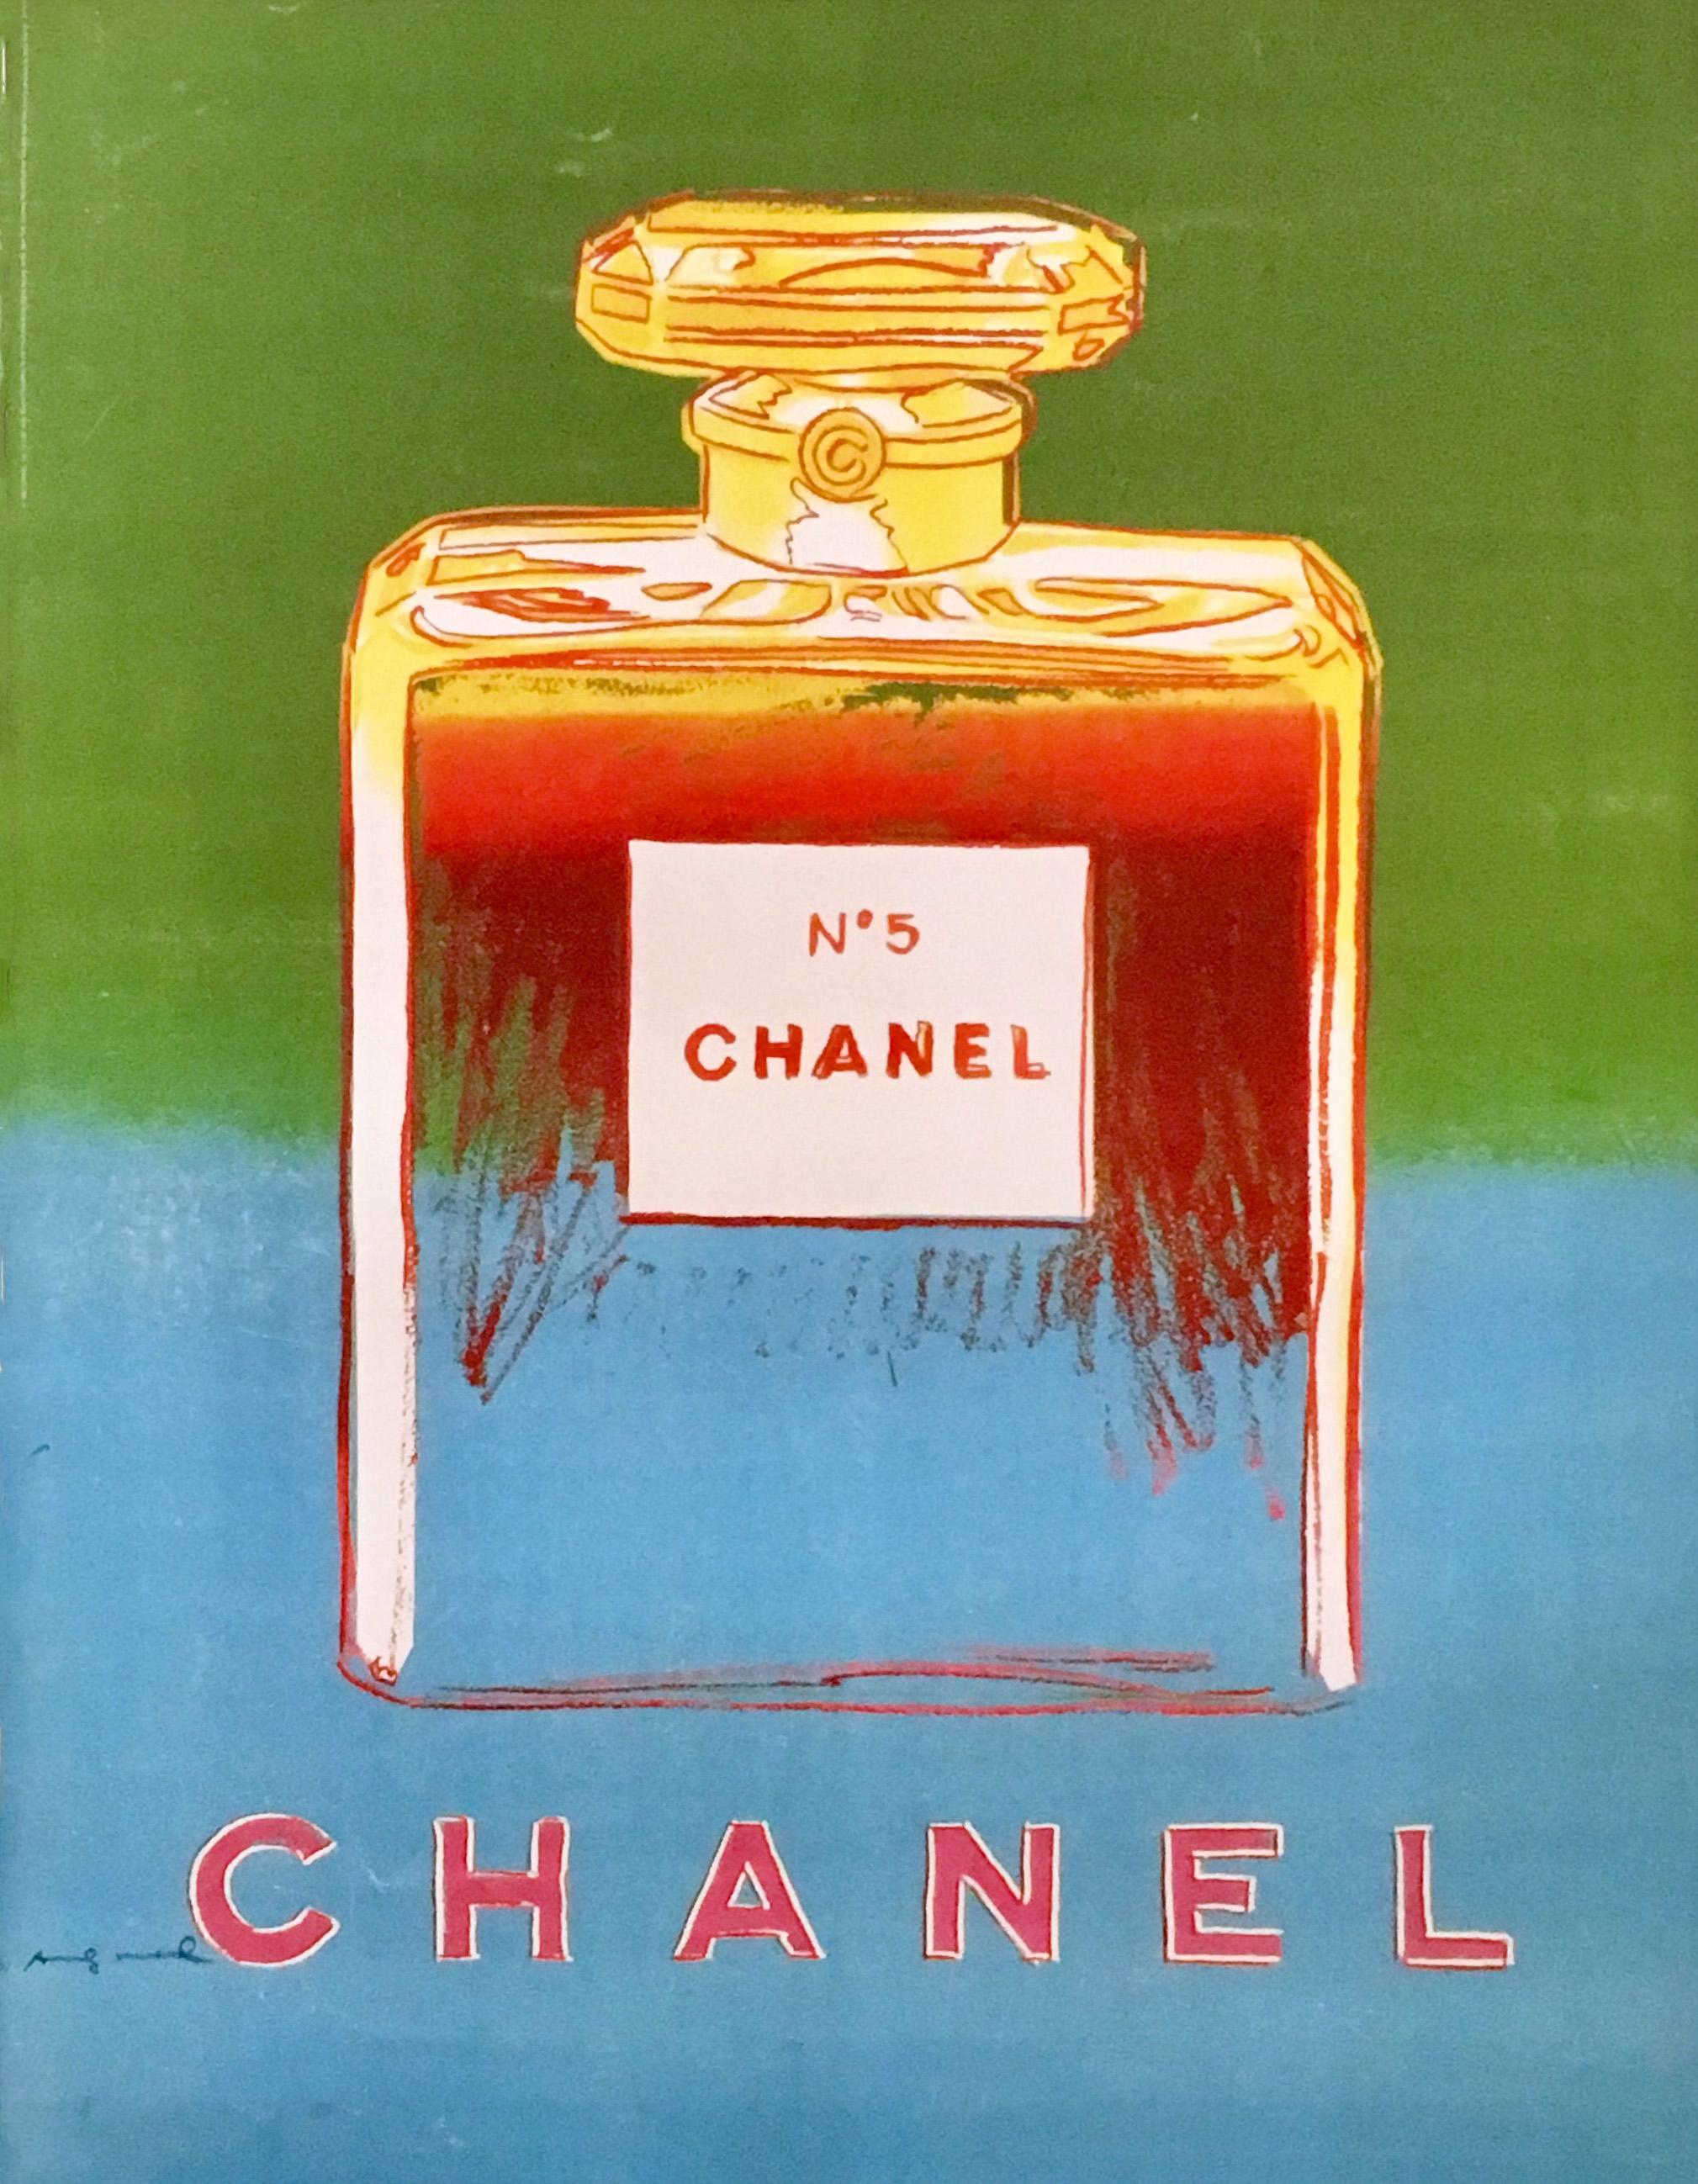 Chanel No. 5 Advertising Campaign Poster - Art by (after) Andy Warhol